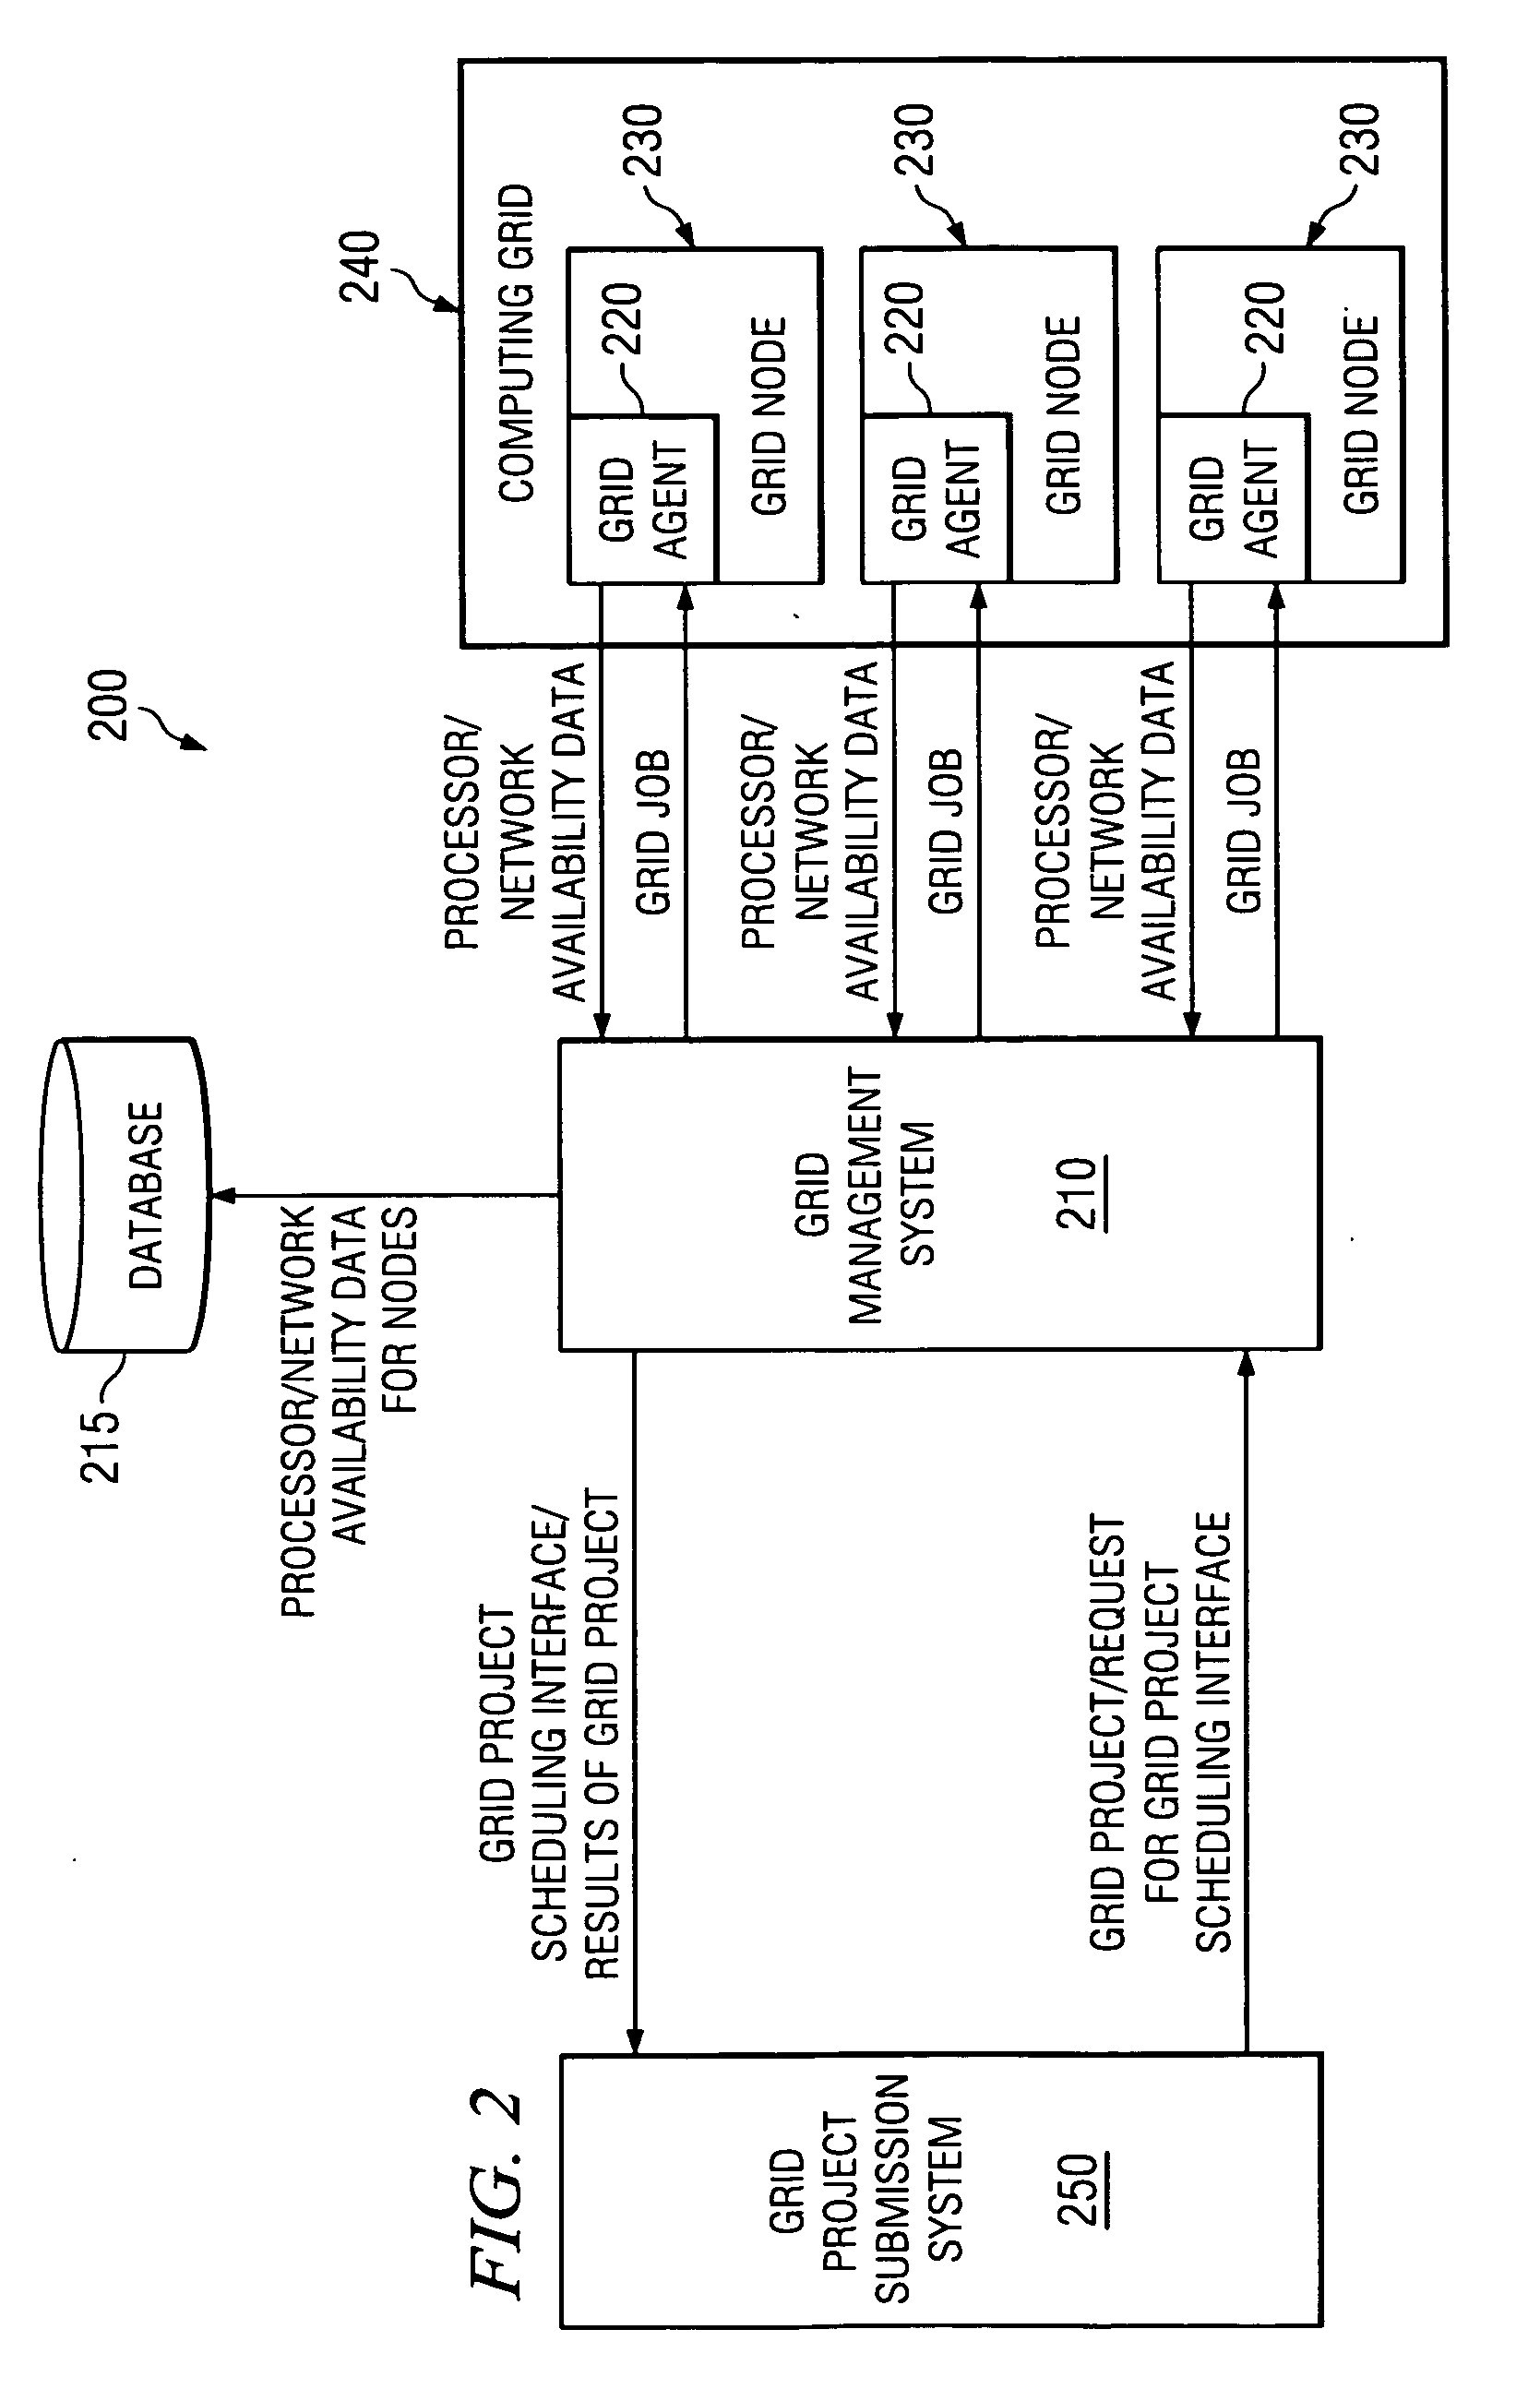 Method and apparatus for grid project modeling language